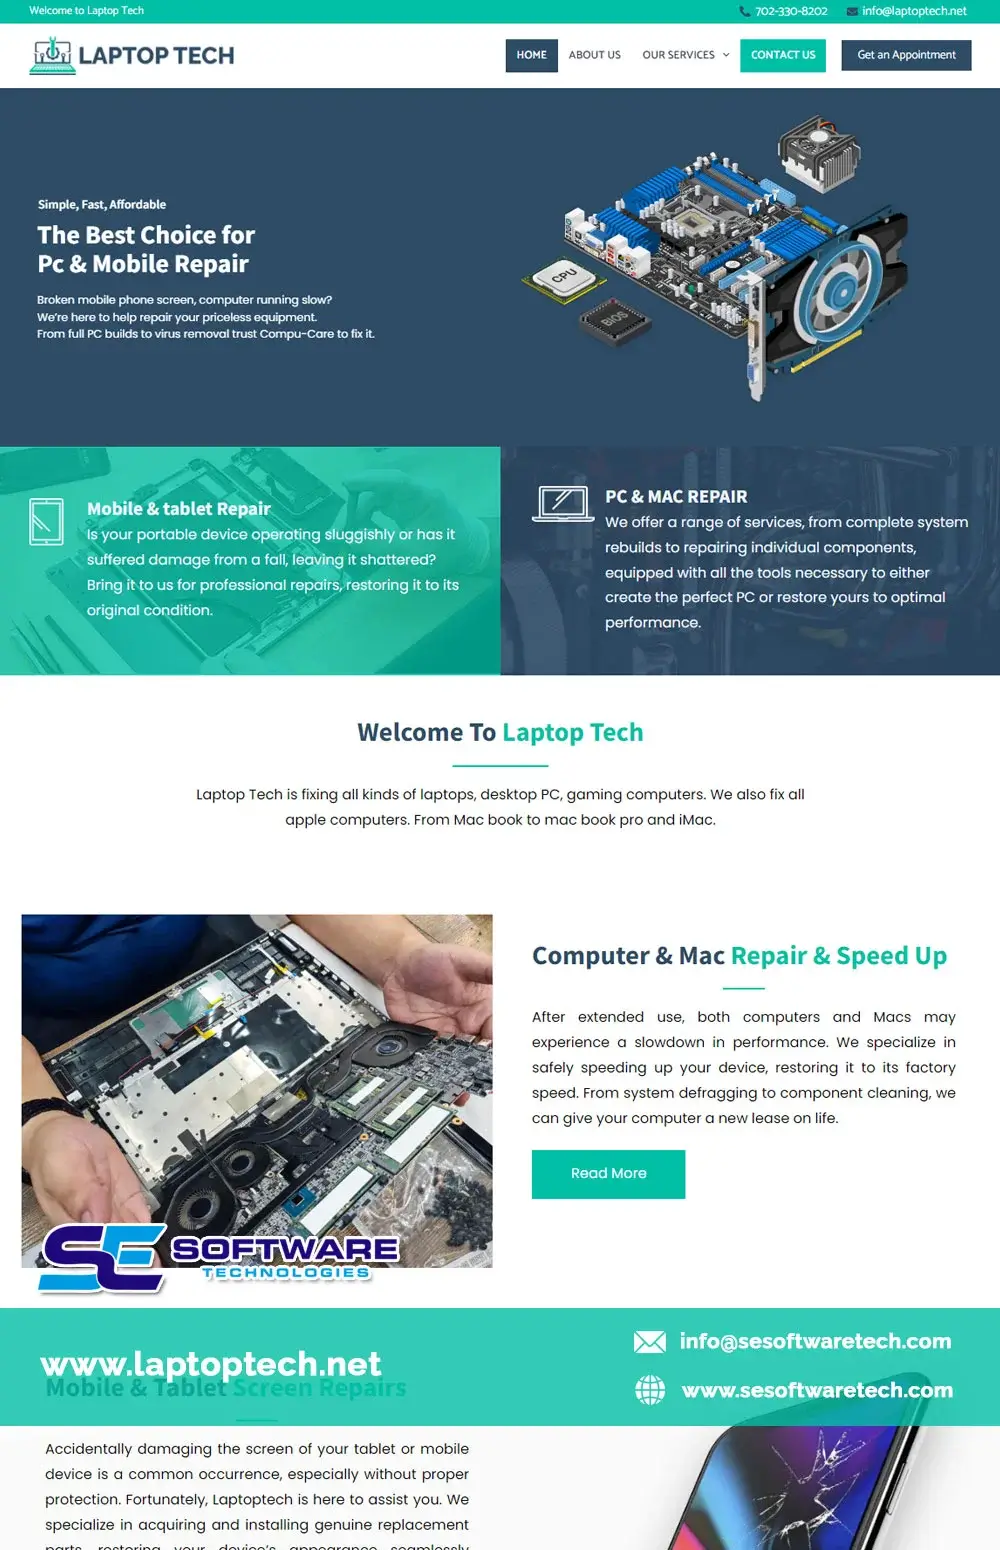 Affordable and Interactive Website Design for Leading Laptop Tech Repair Hub